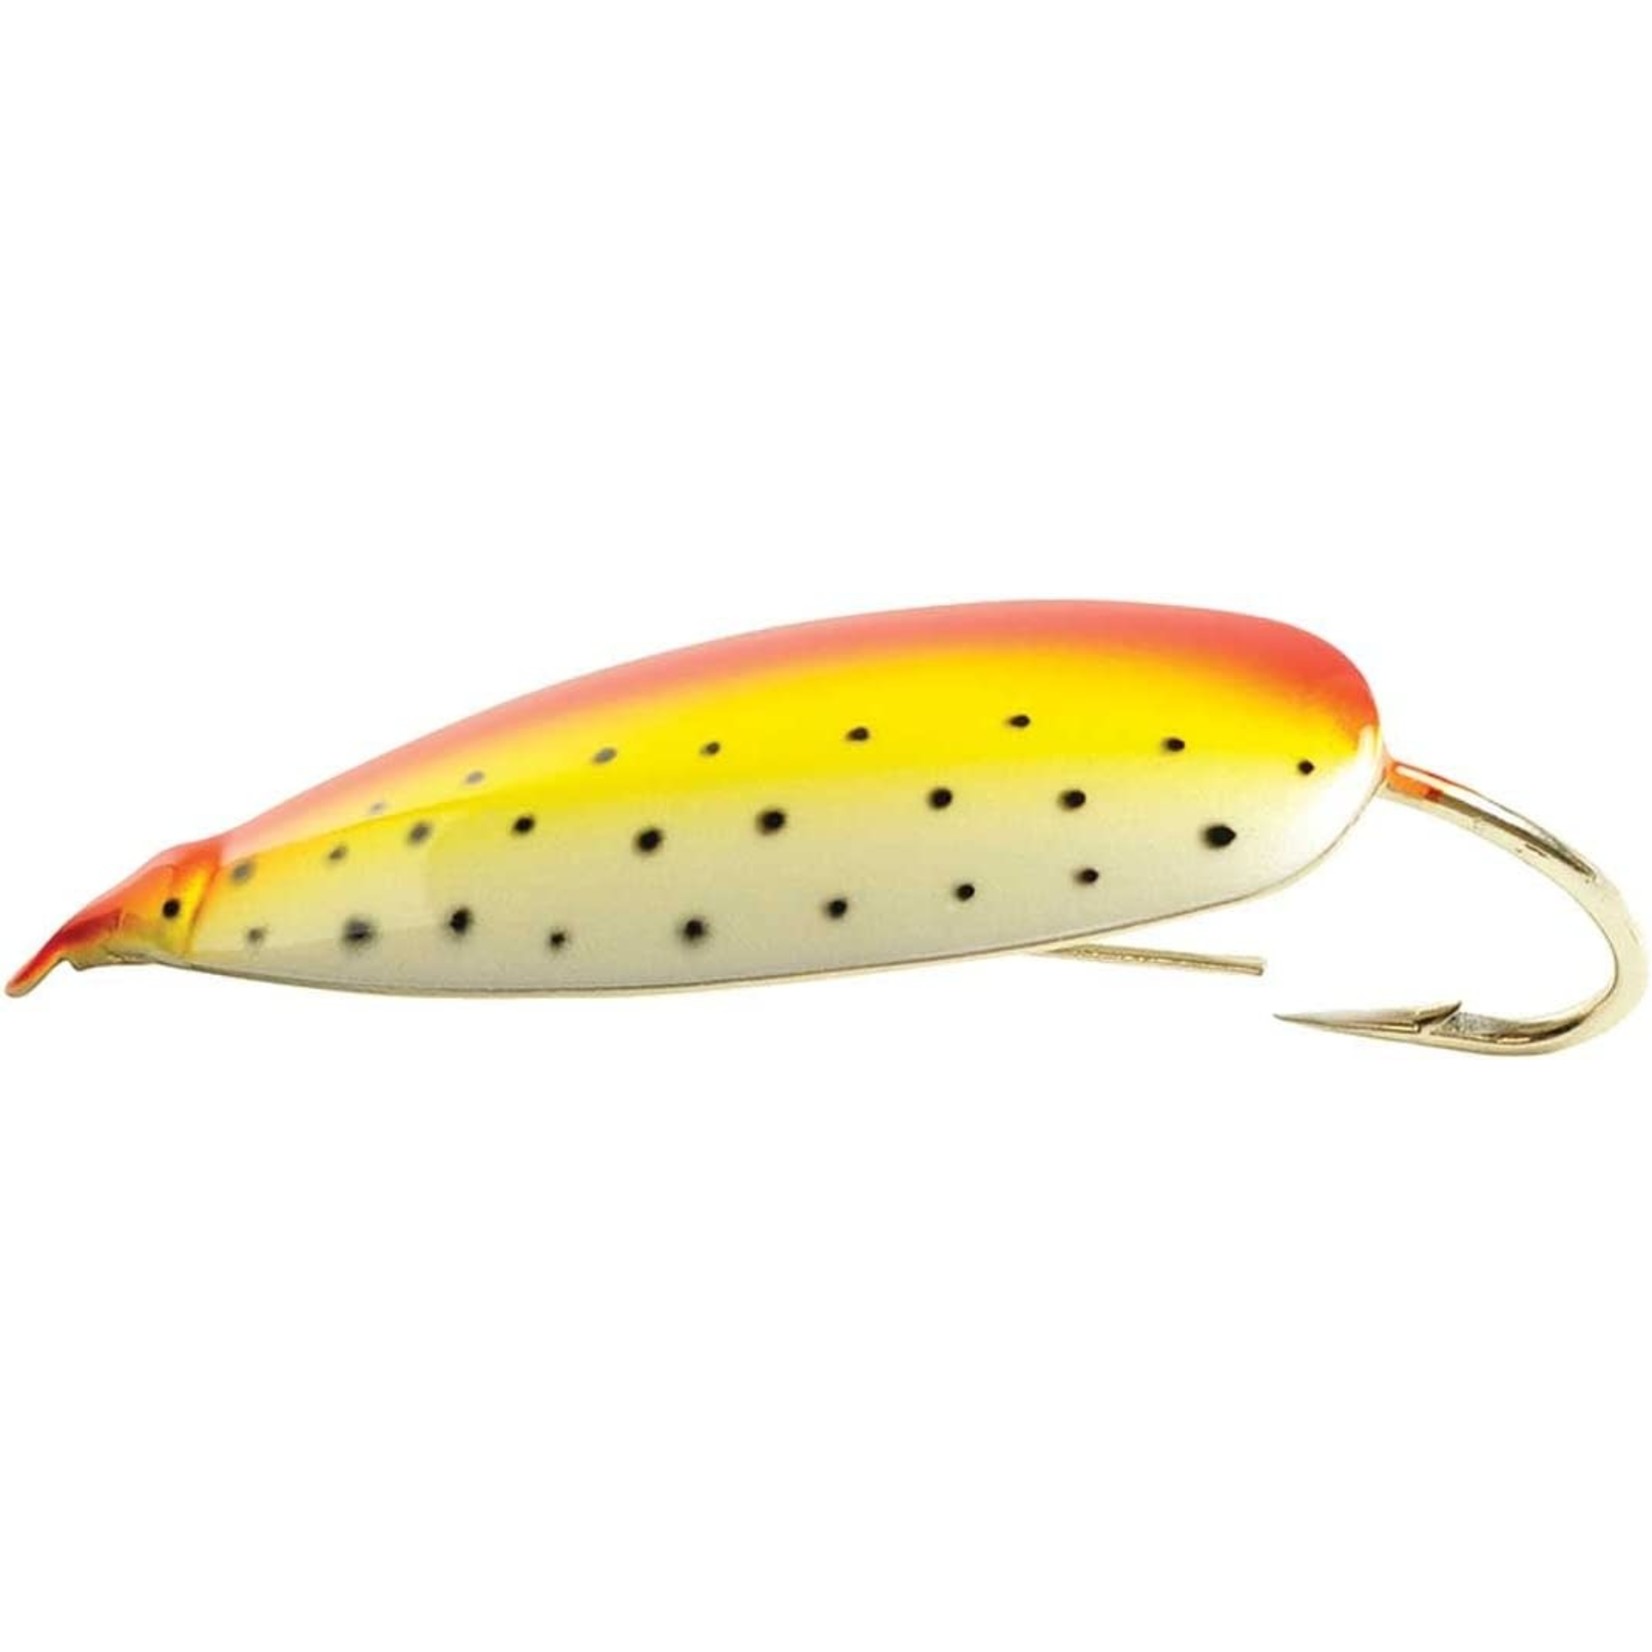 Silver Minnow New Penny 2in - 1/4 oz - Butte's Outdoor Edge